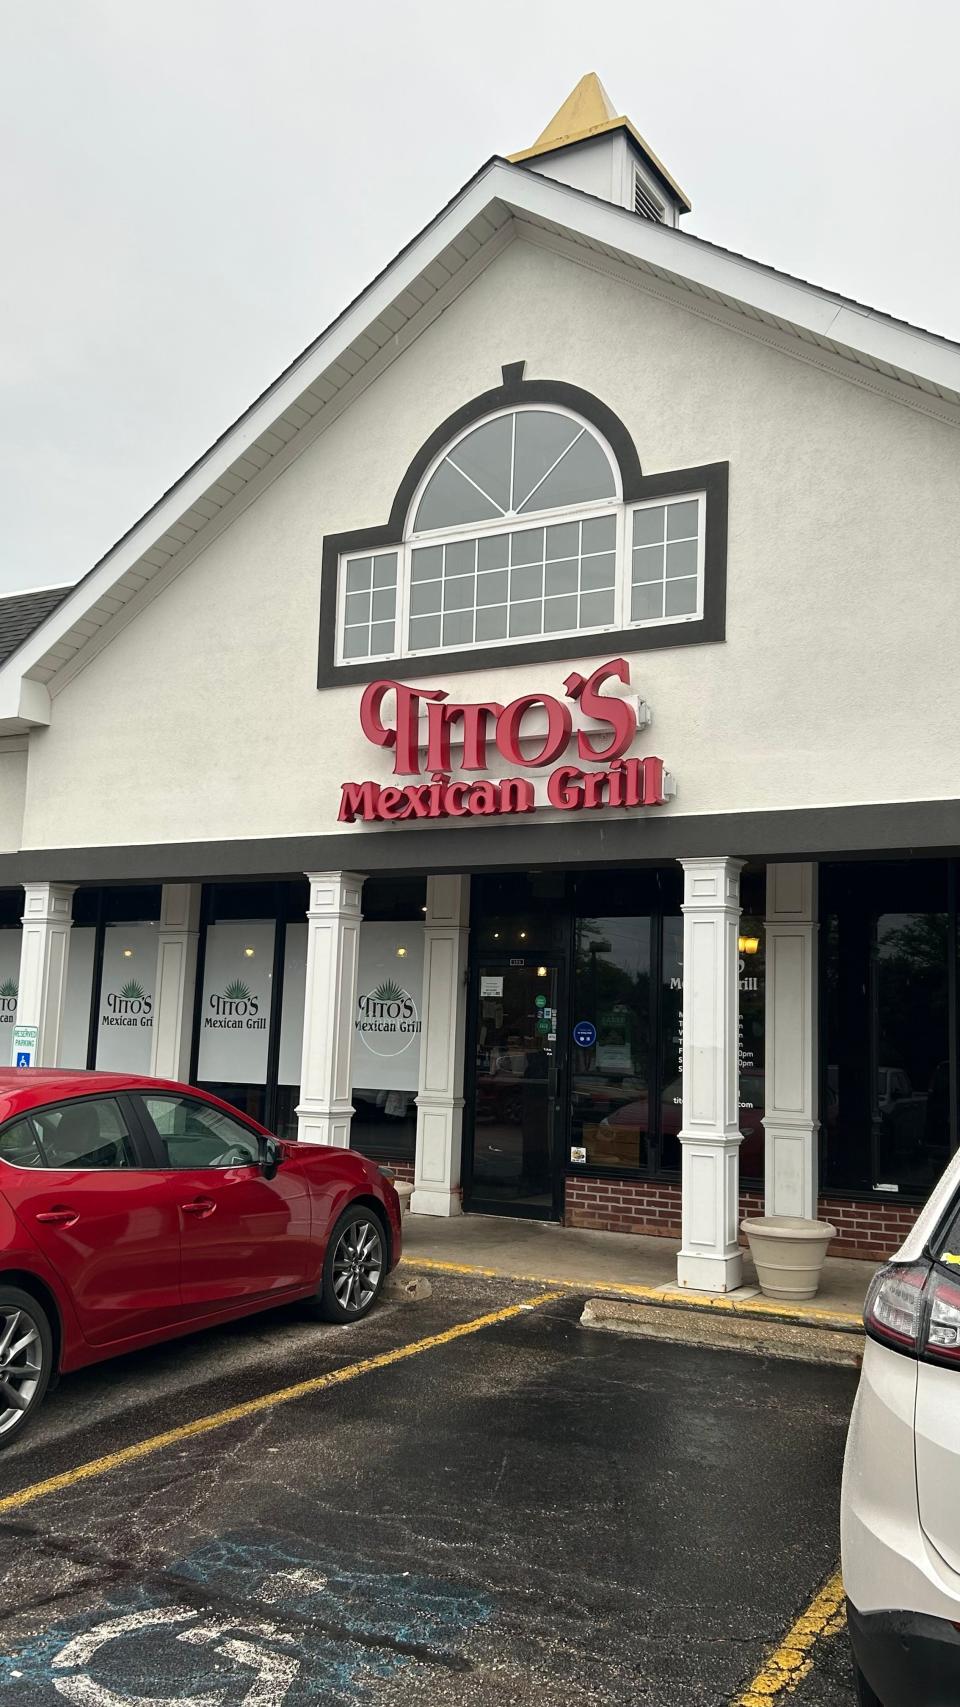 Tito's Mexican Grill is located at 45 Ghent Road in Fairlawn.